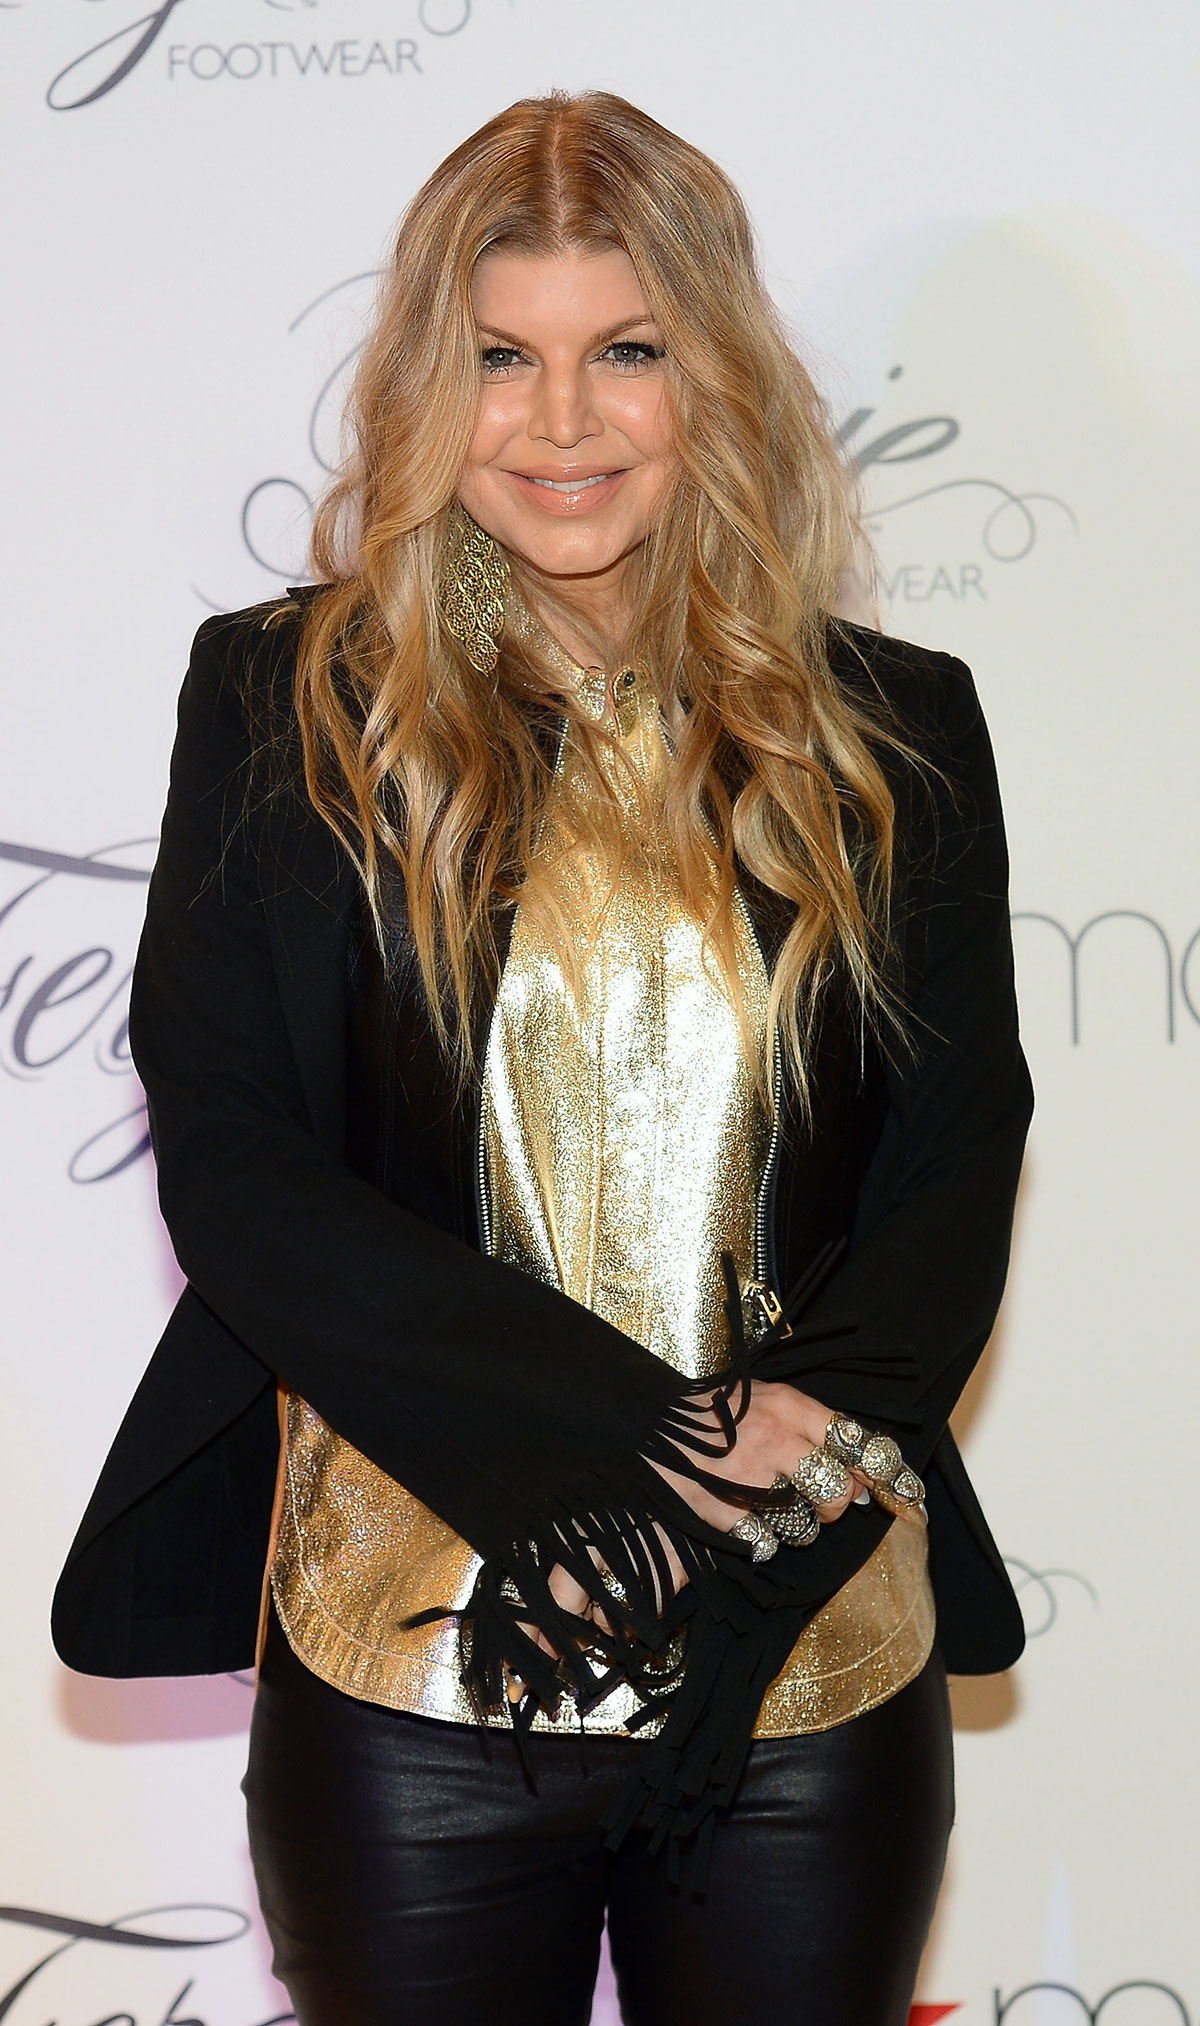 Fergie Duhamel at Macy’s at the Fashion Show mall